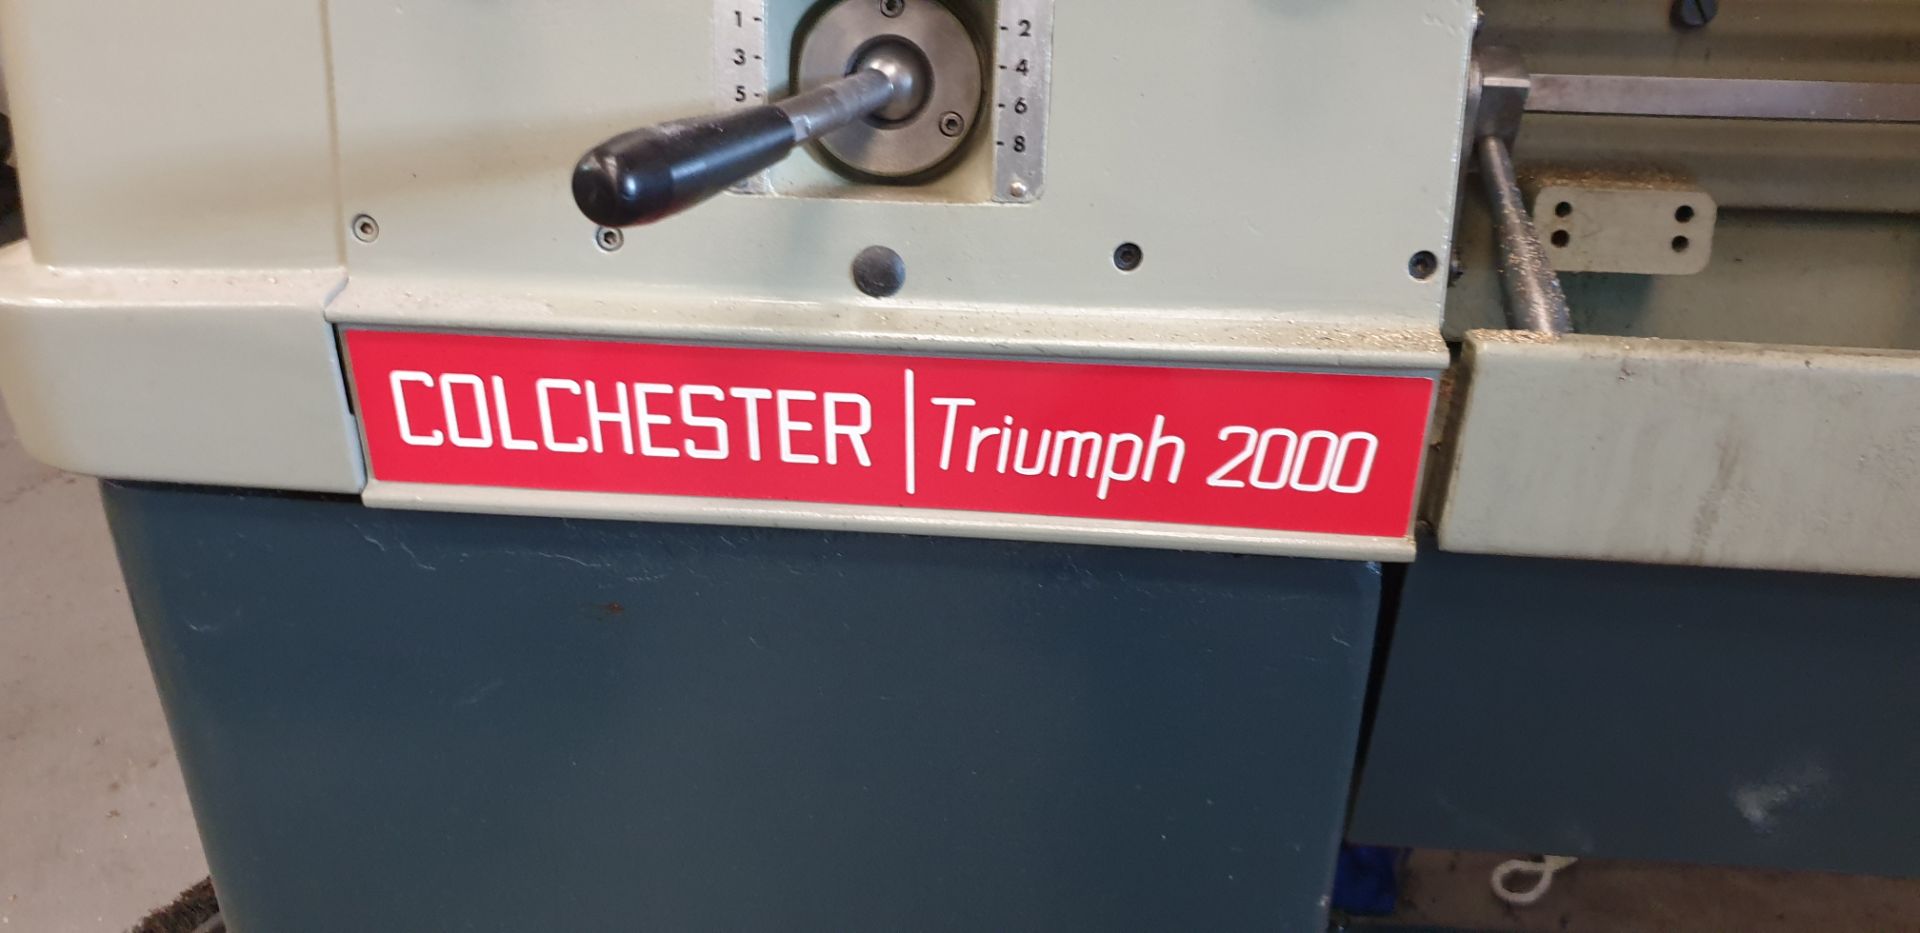 Colchester Triumph 2000, Gap Bed SS & SC Centre Lathe With a GT DRO3 two-axis Digital Read-out, Seri - Image 3 of 5